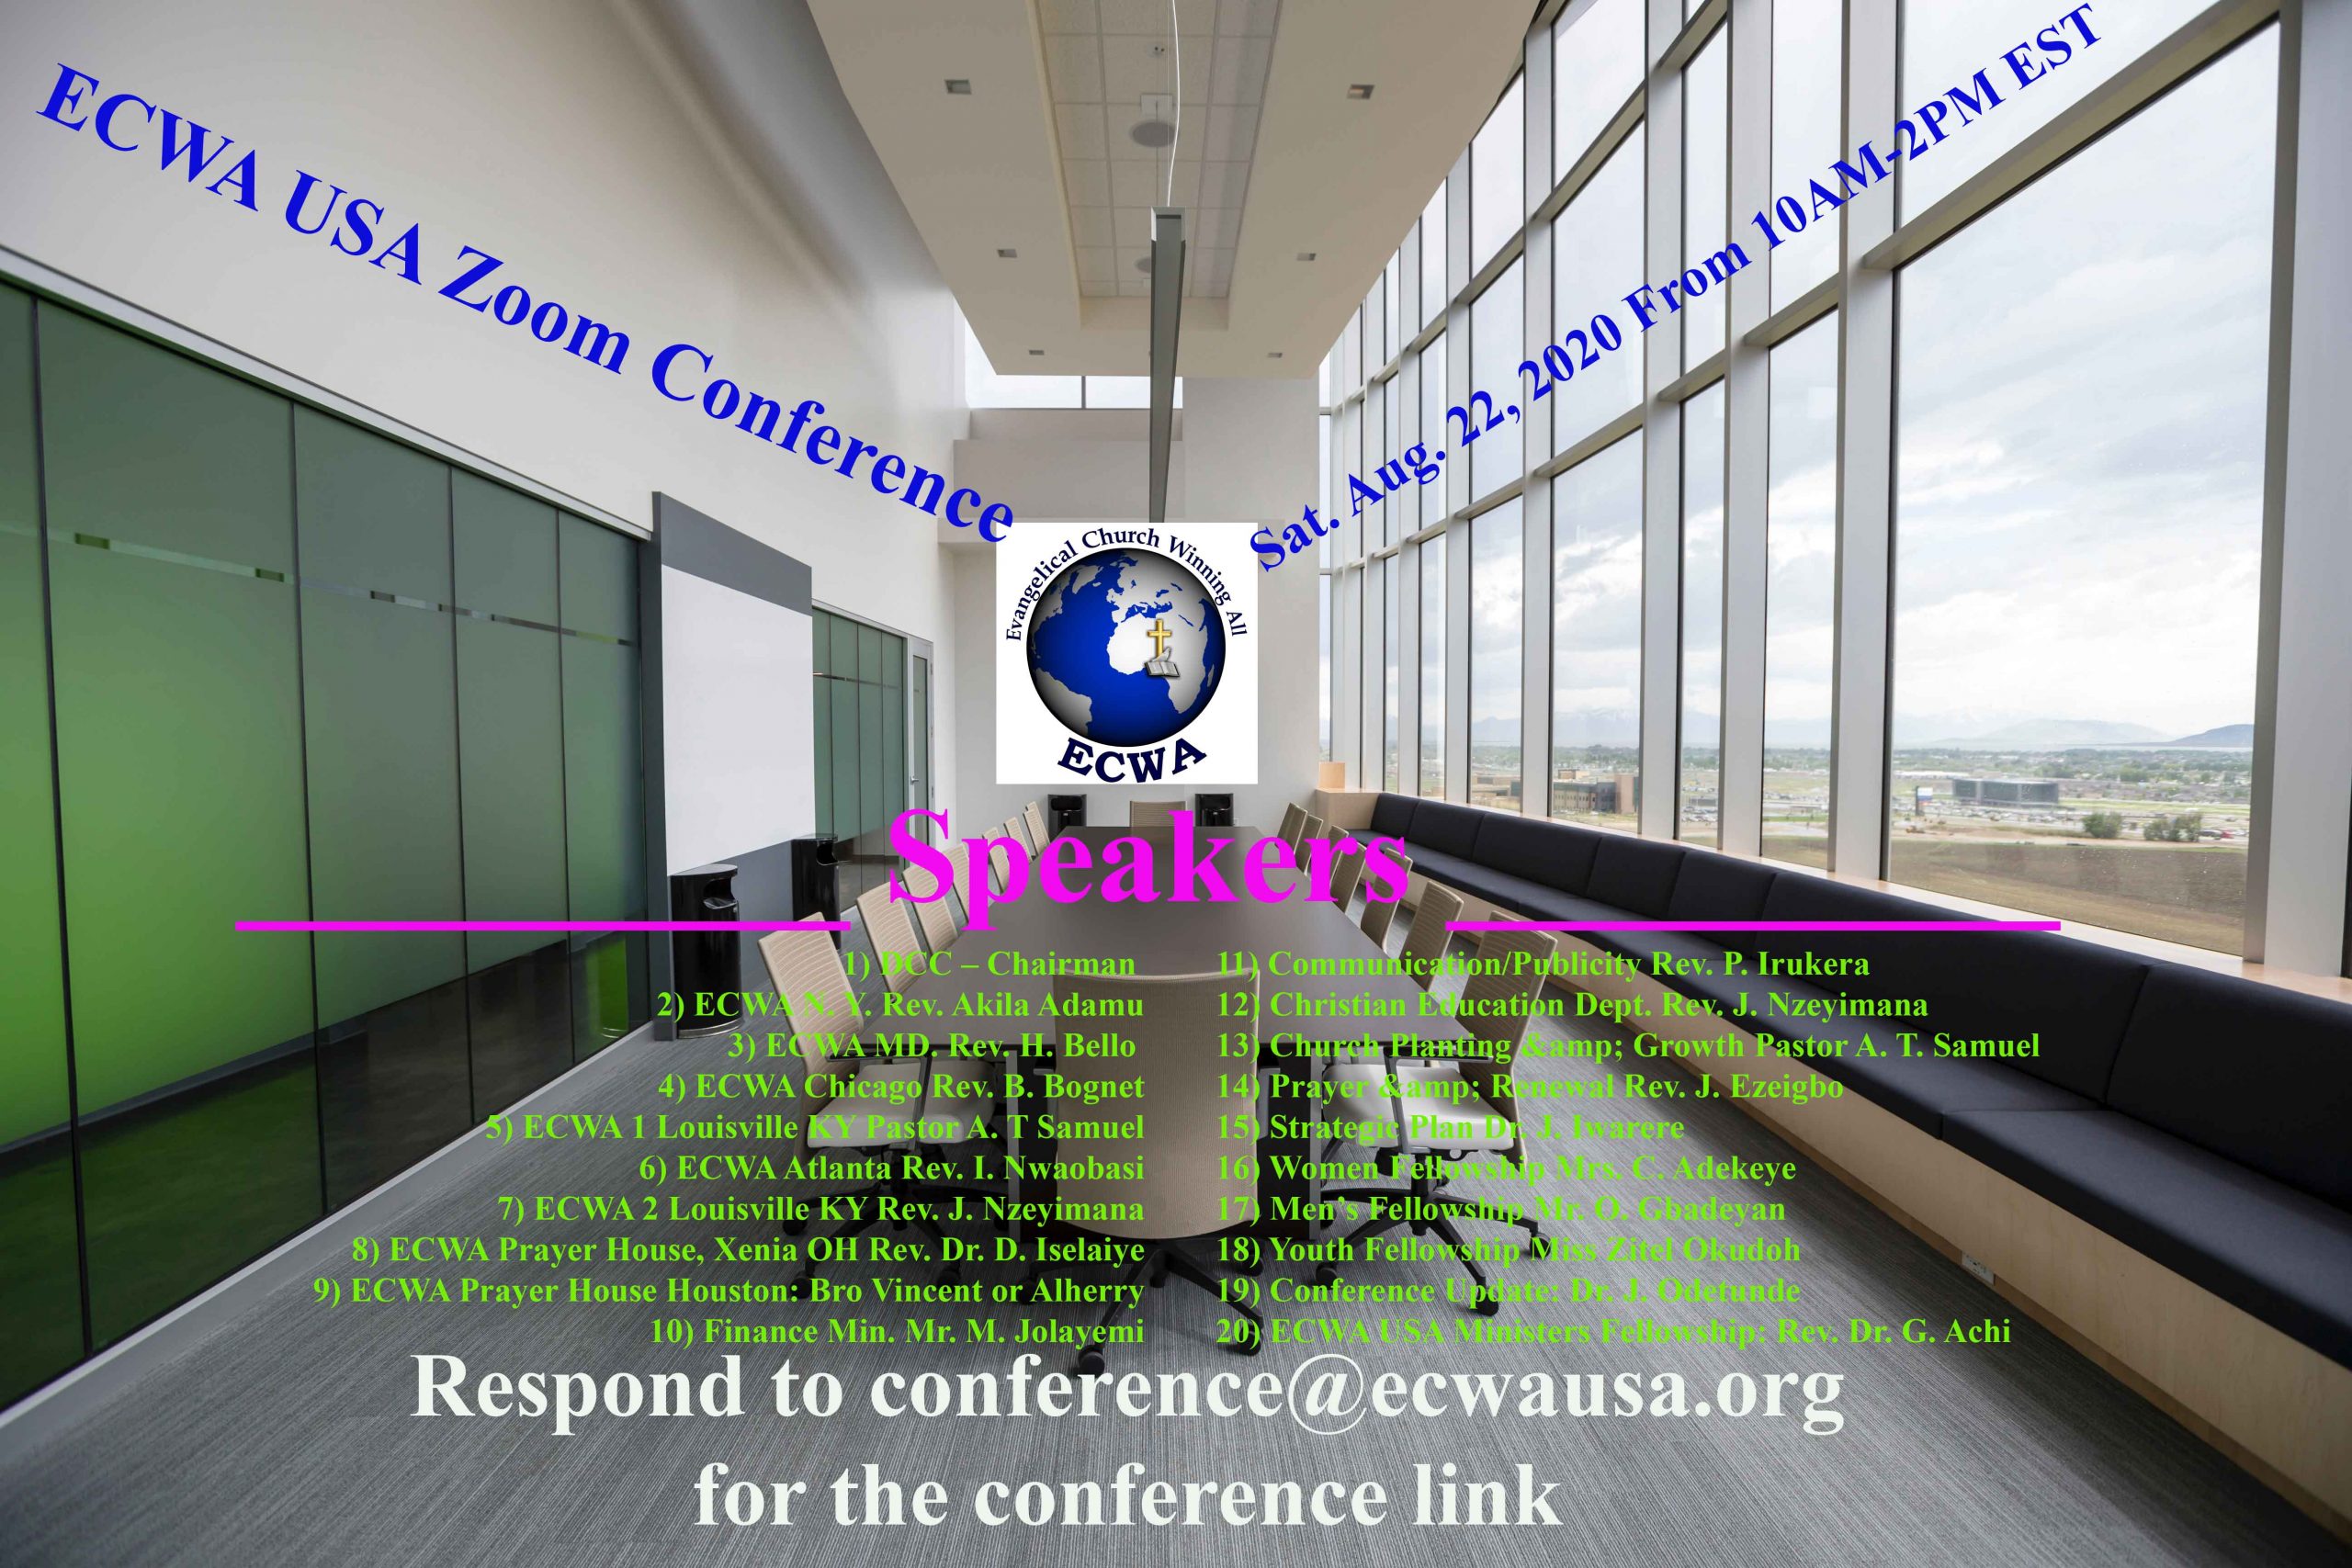 ECWA USA Zoom Conference: Sat. Aug. 22, 2020 From 10am-2pm EST